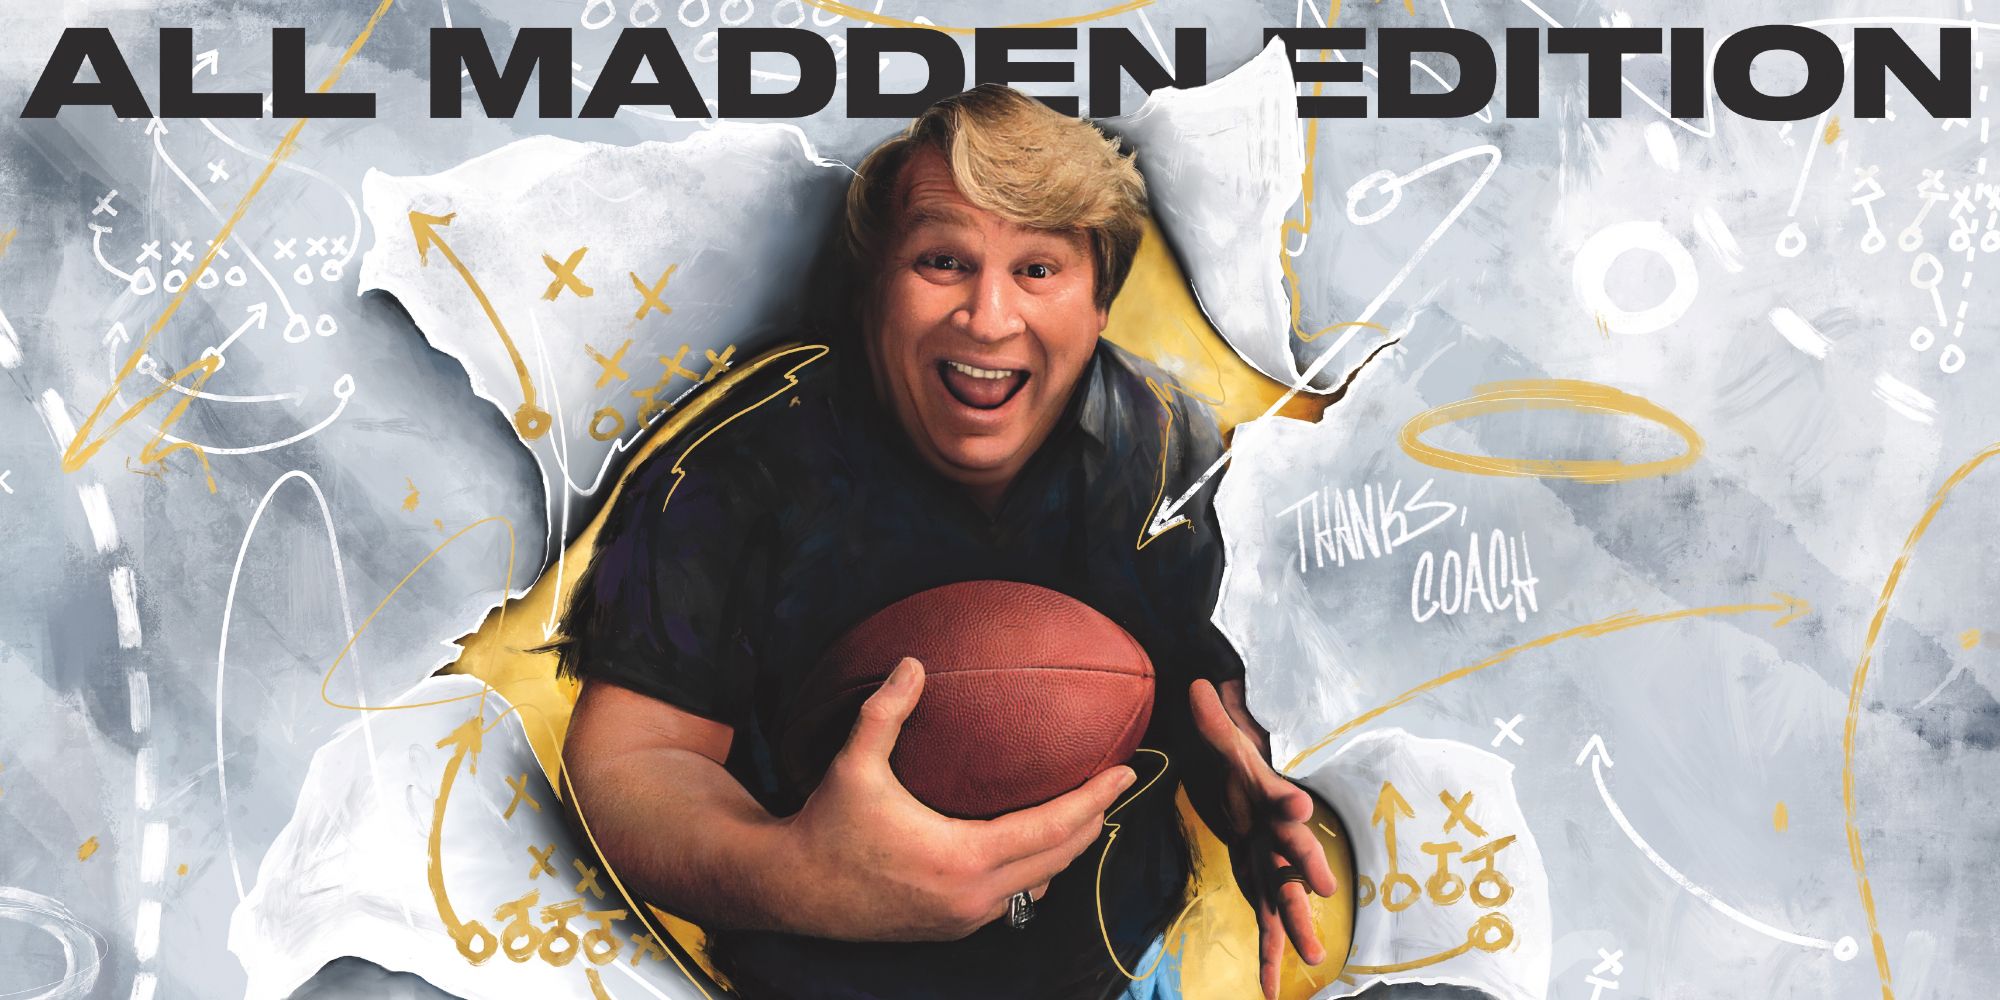 Madden NFL 23 is honoring its namesake, John Madden, with three separate covers featuring the legendary Oakland Raiders head coach